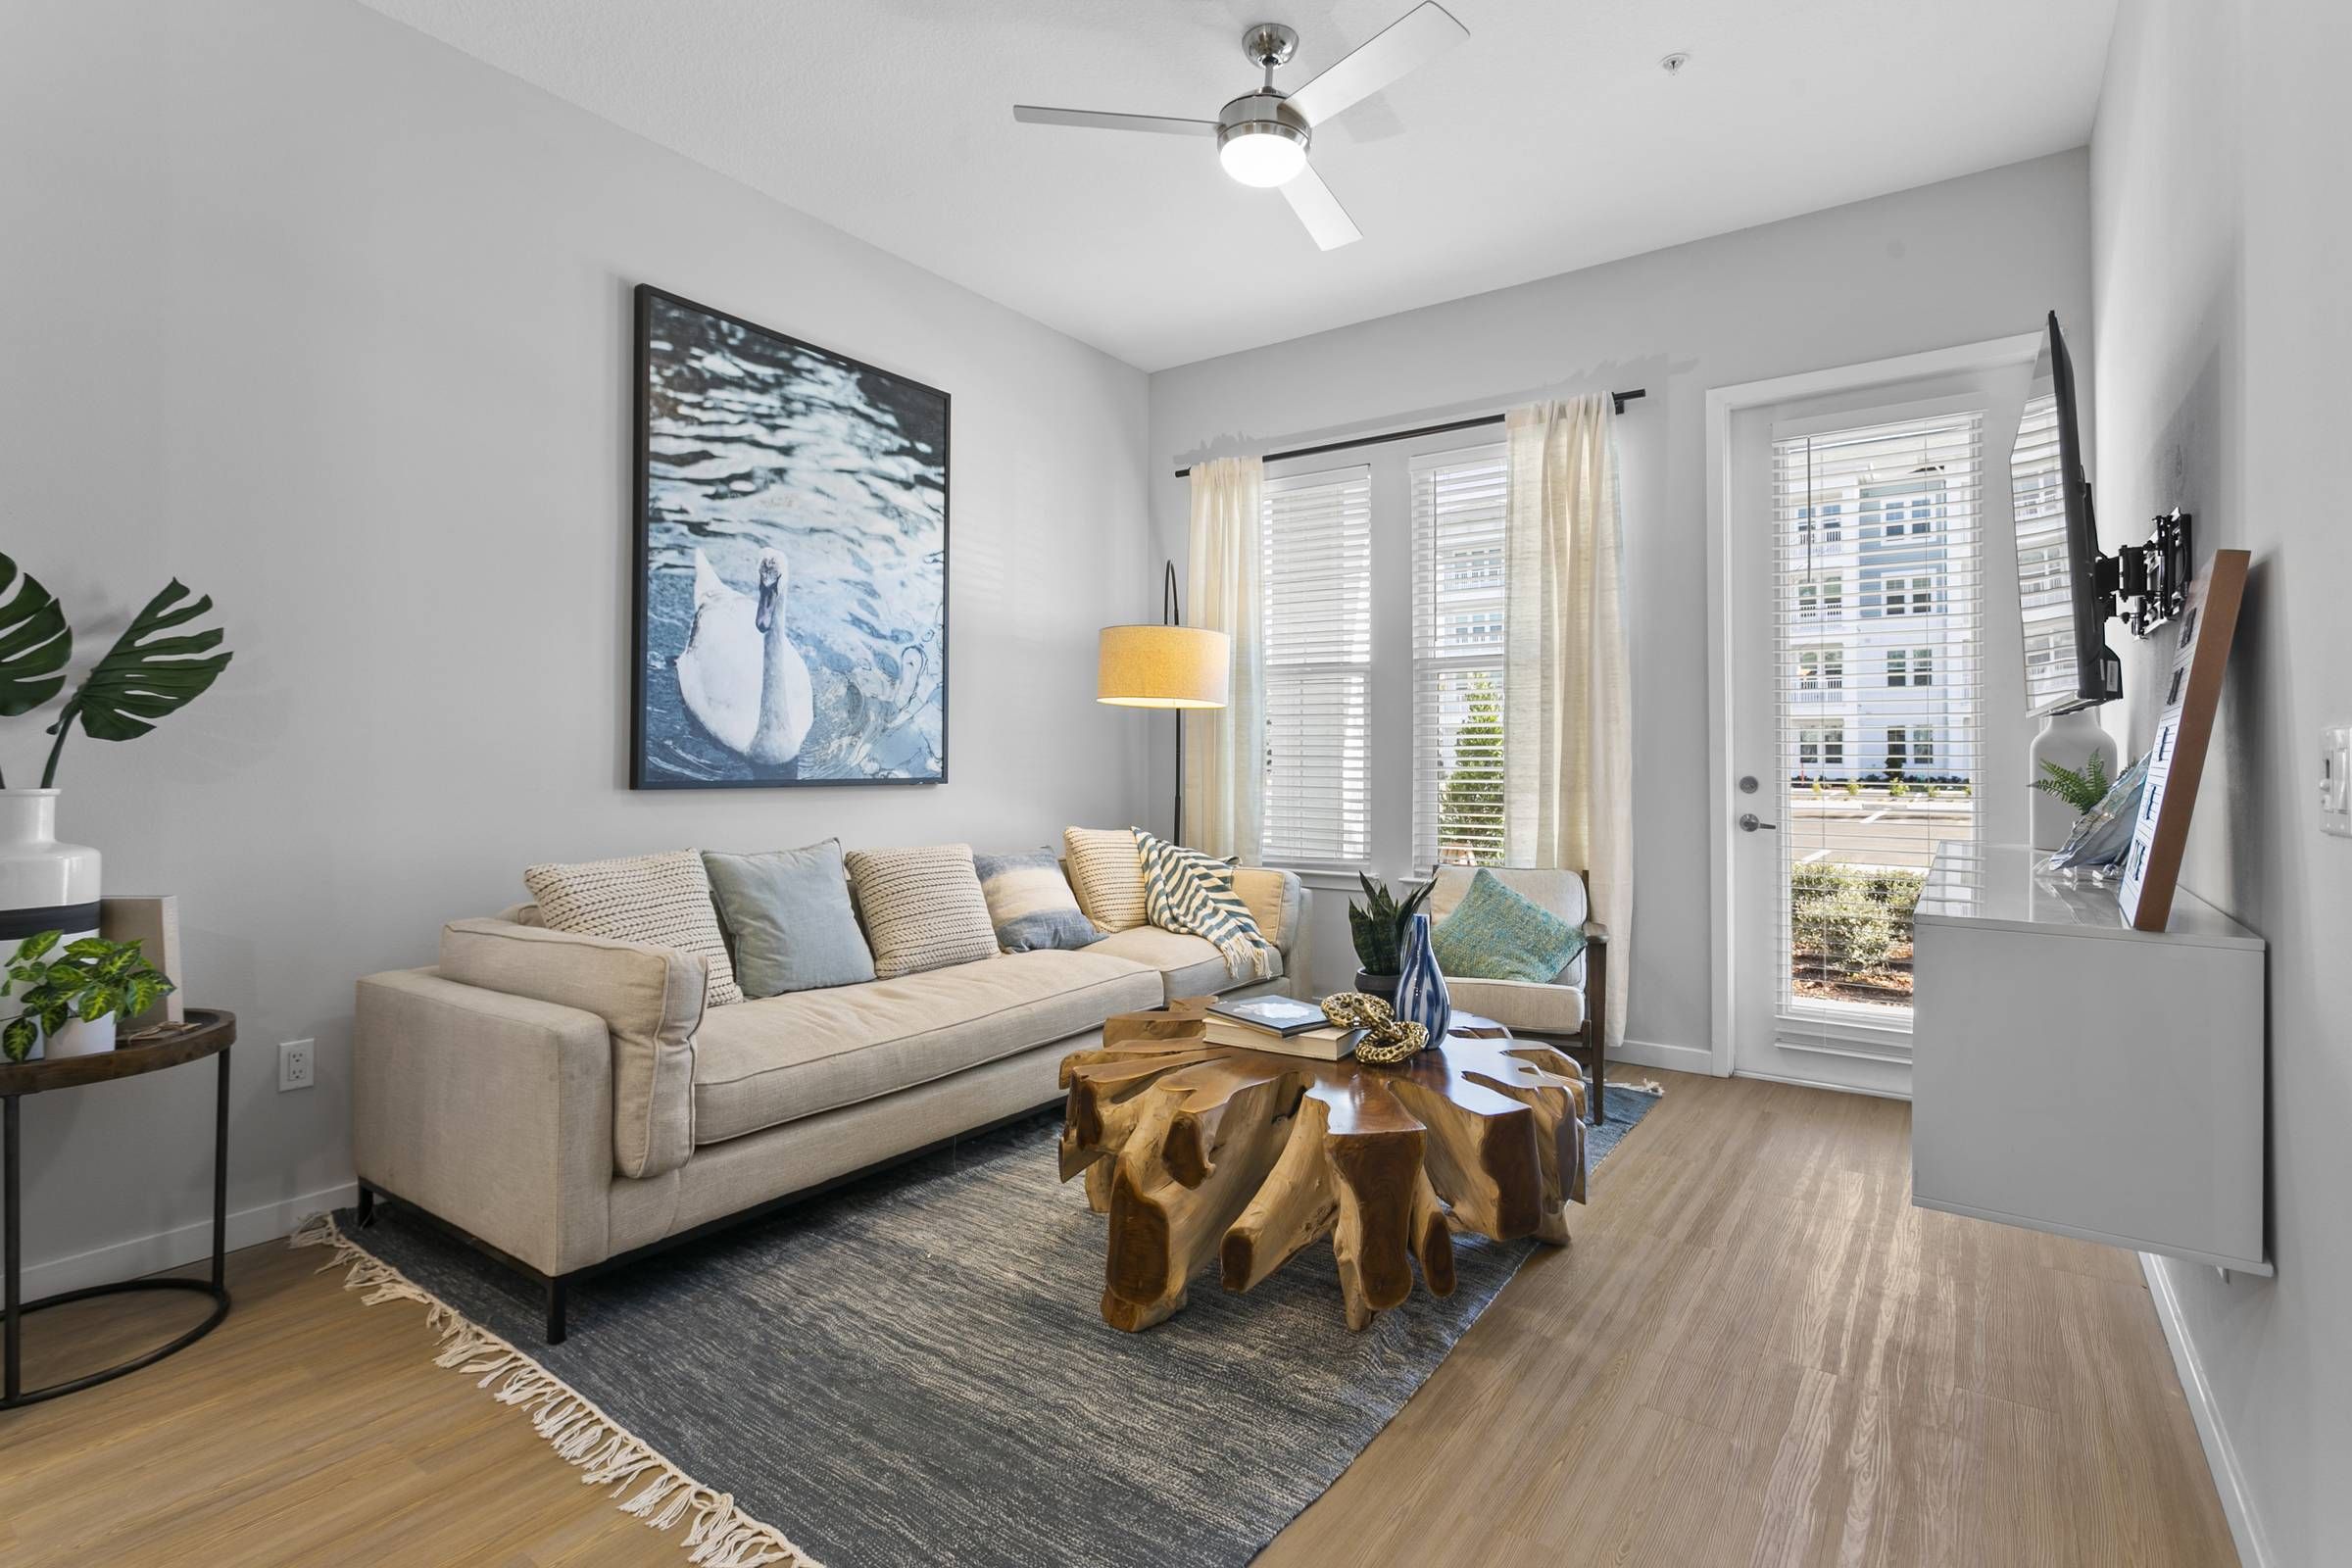 A spacious living room at Alta Belleair, furnished with a neutral-toned couch, artistic coffee table, and serene blue decorative elements, radiating a calming vibe.